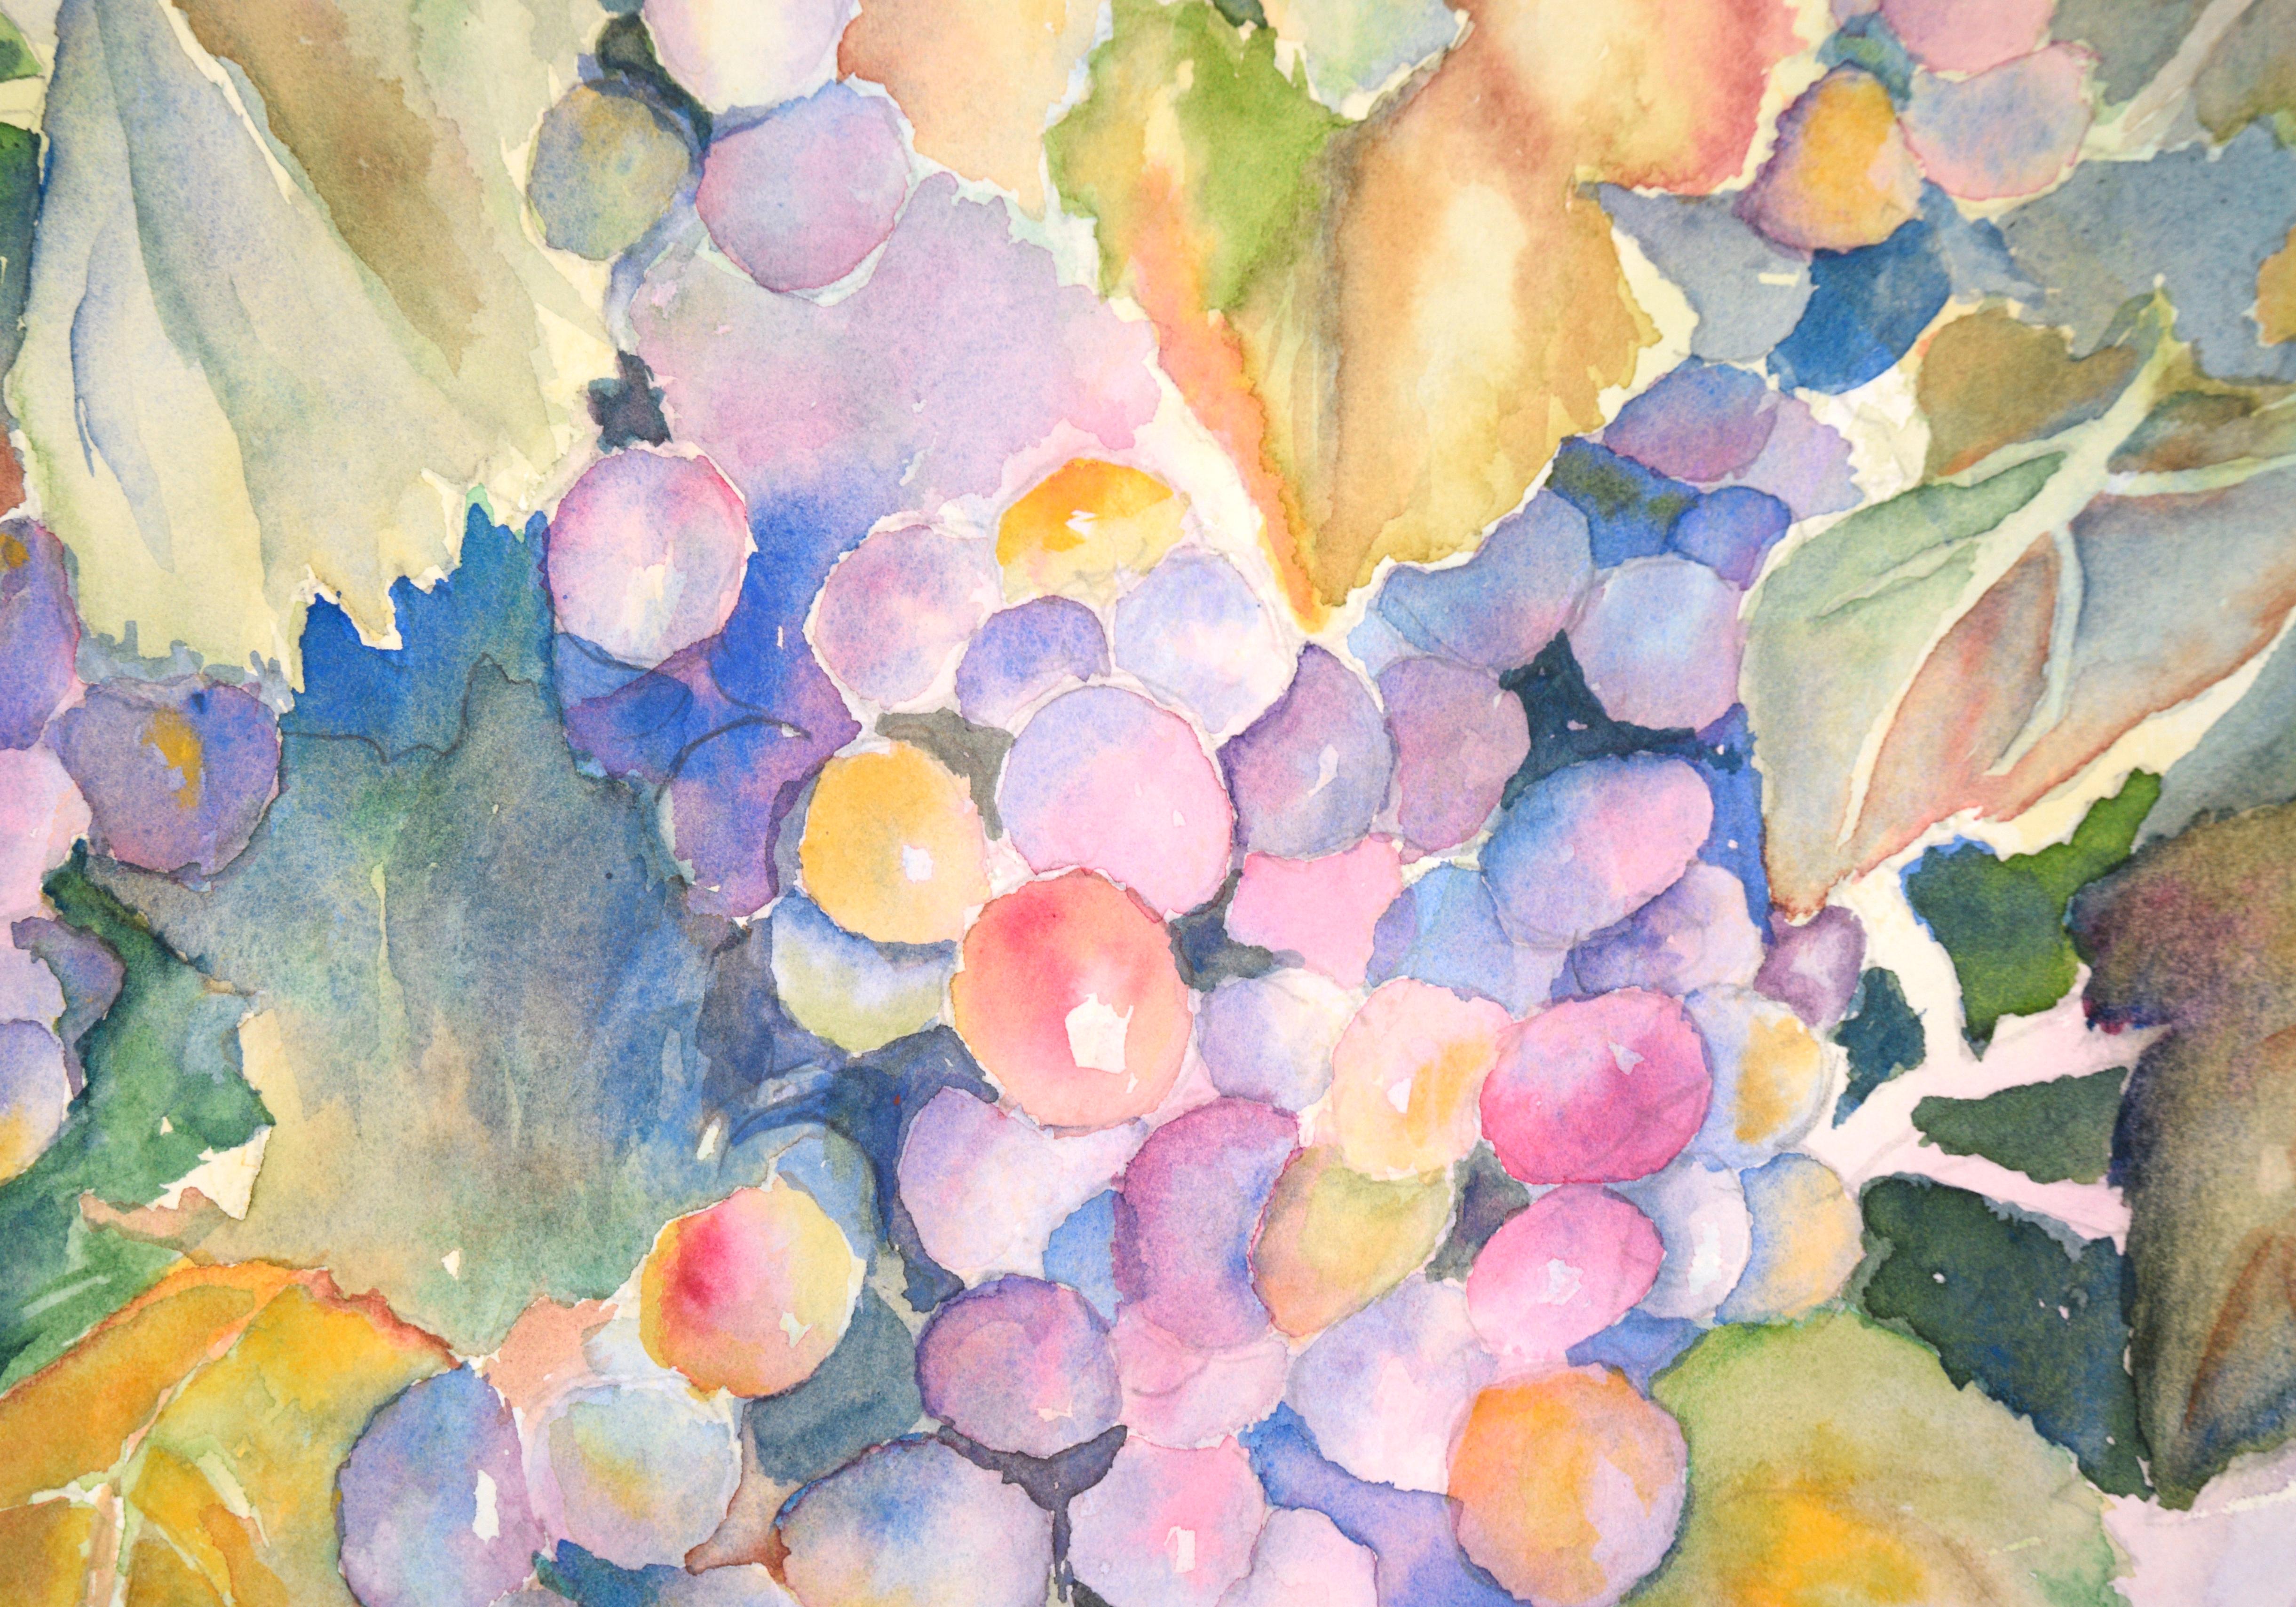 Vibrant still life of grapes on the vine by an unknown artist (20th Century). A bunch of bright purple and red grapes peek out from behind lush green vines and leaves.

Signed (illegible) in the lower right corner.
Presented in a new warm grey